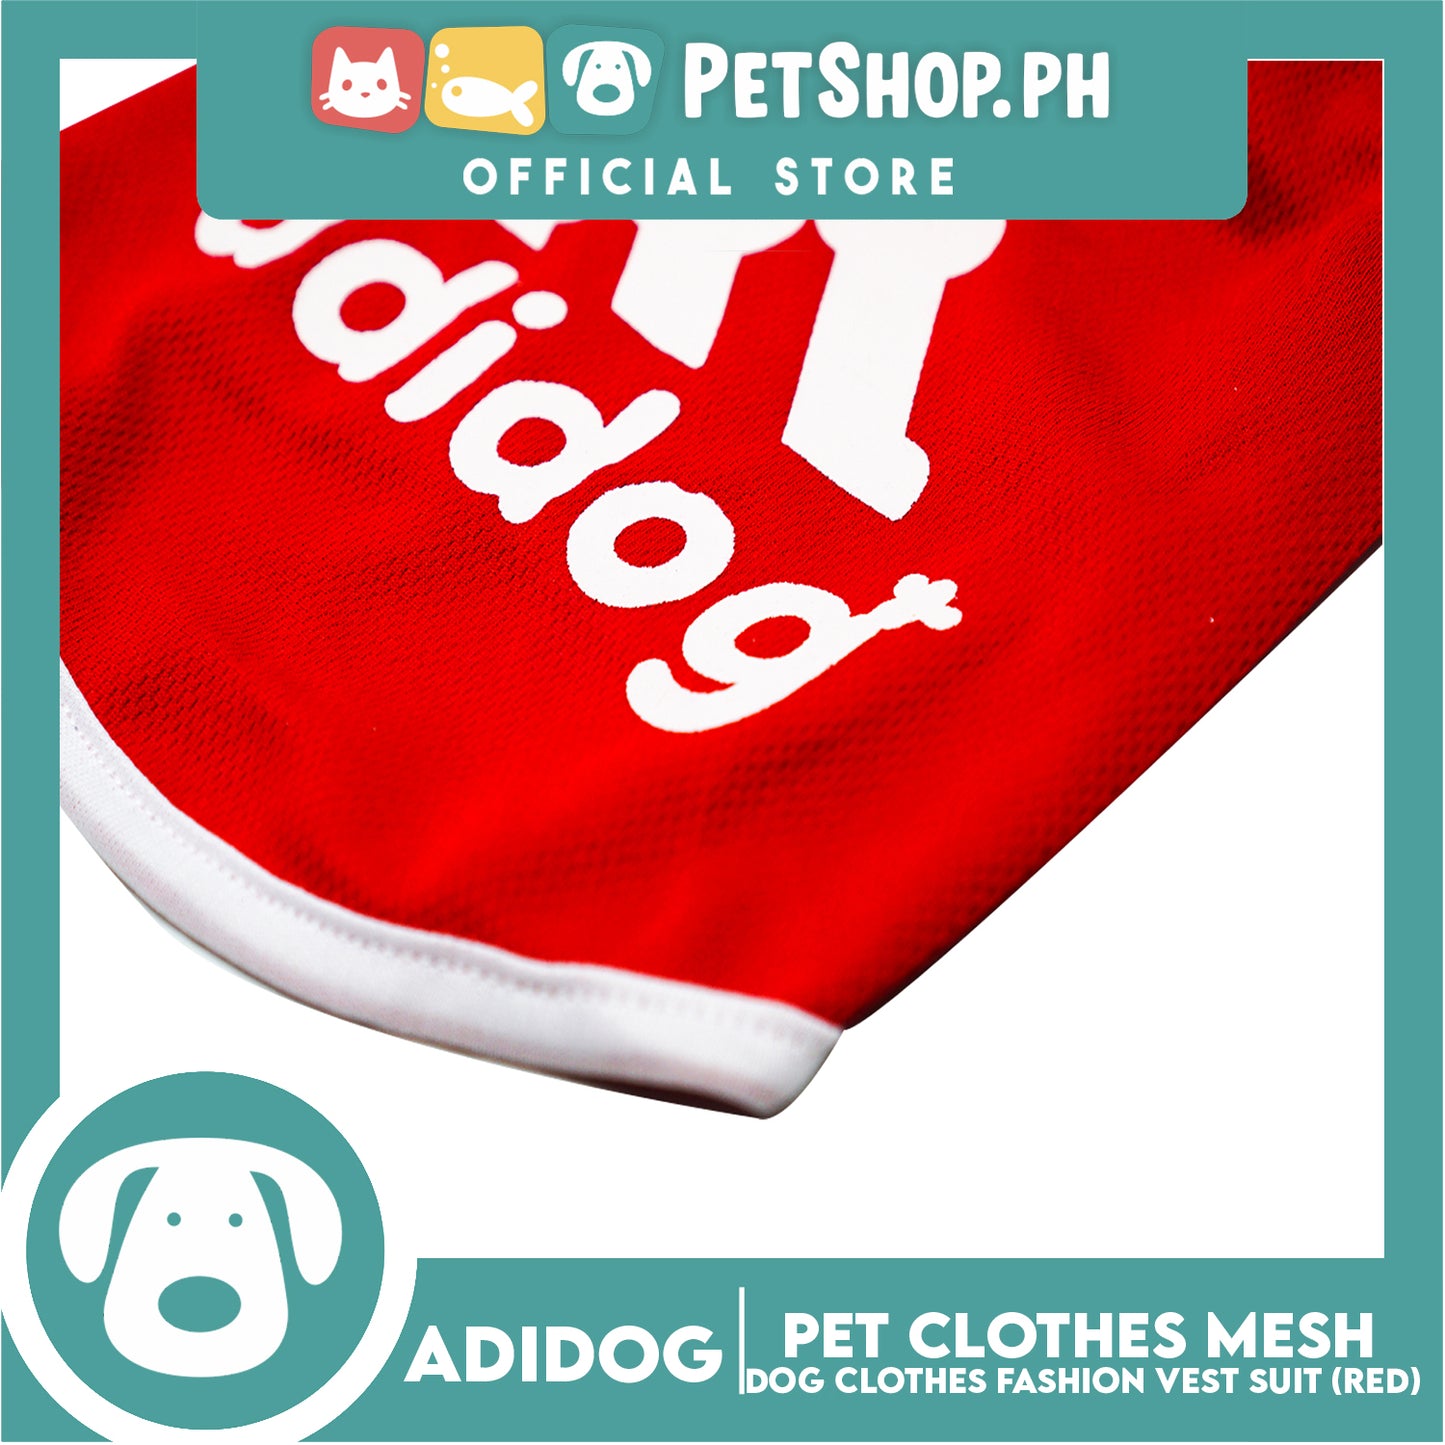 Adidog Pet Clothes Mesh Vet, Summer Dog Clothes, Breathable Mesh Vet, Dog Shirt, Pet Jersey, Fashion Vest Suit for Dogs (Red) (Large)